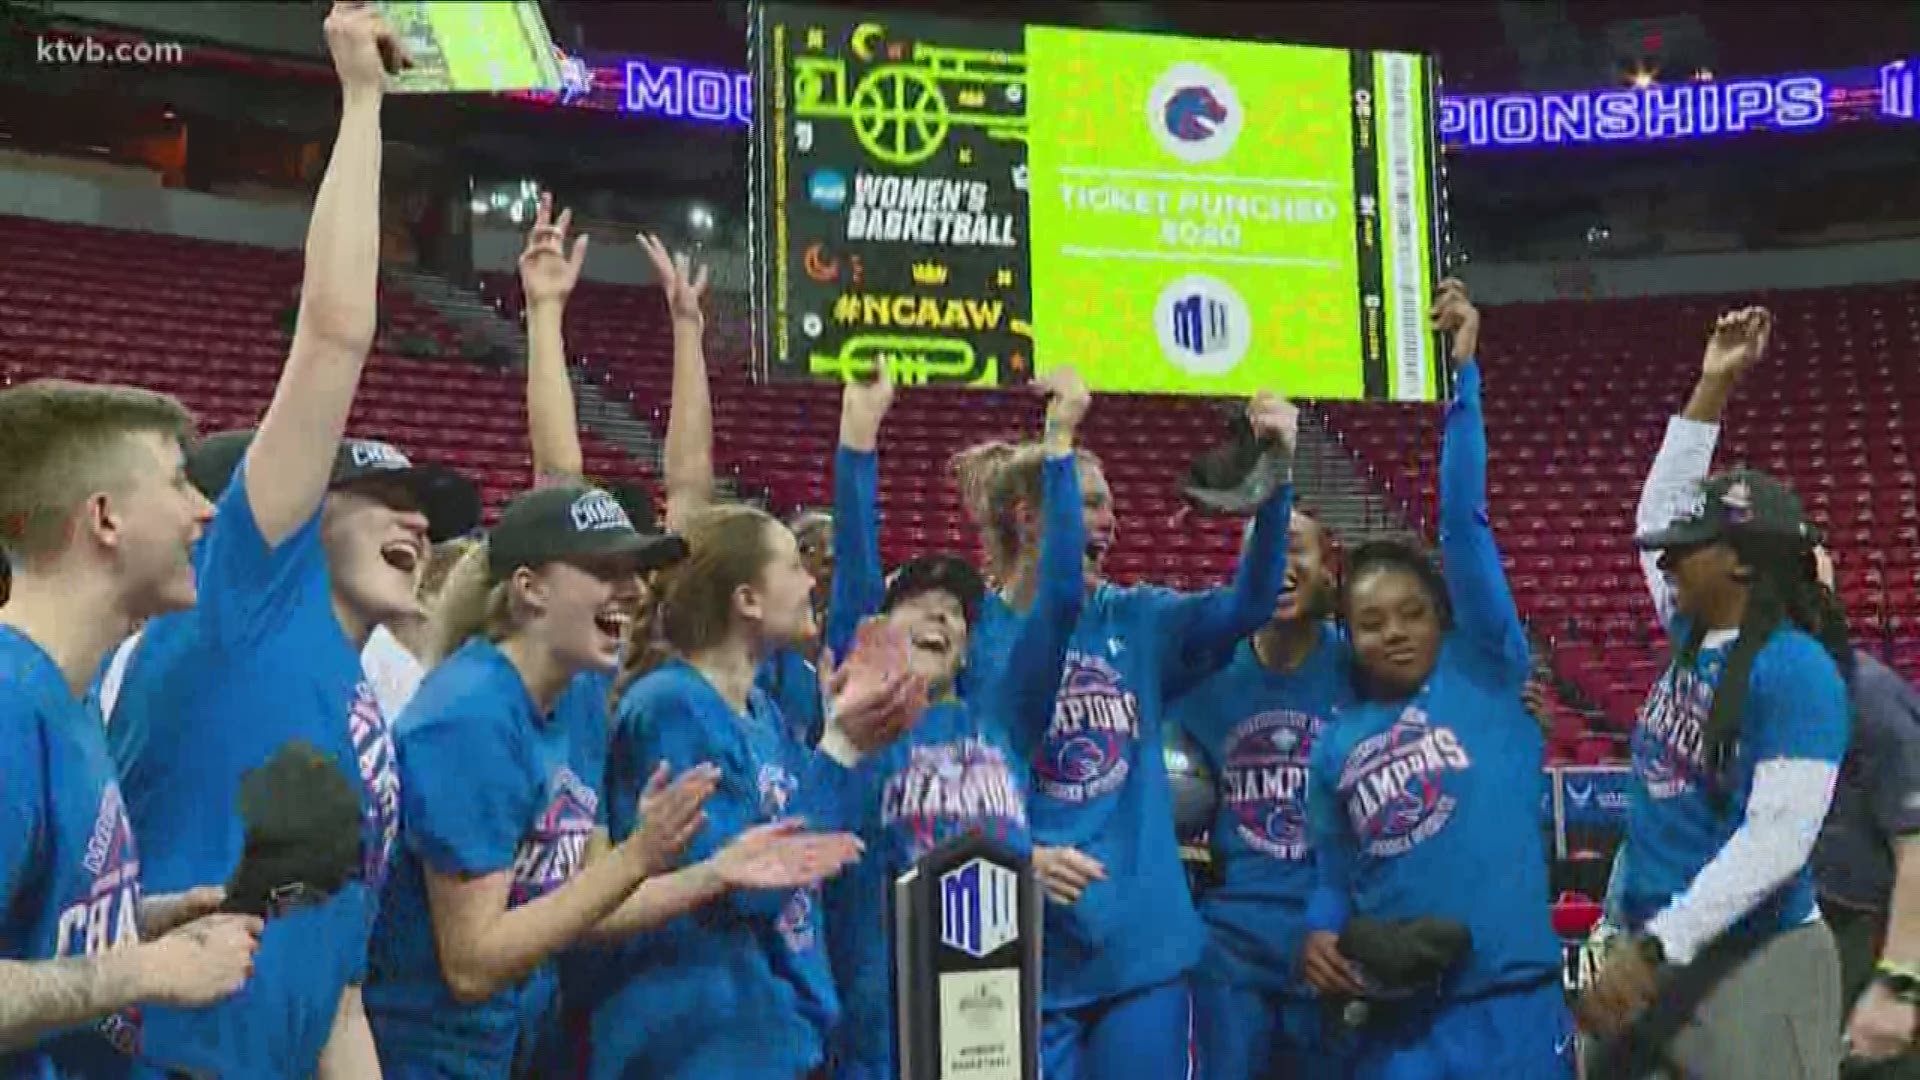 With the win, BSU becomes the first team to qualify for the NCAA Tournament